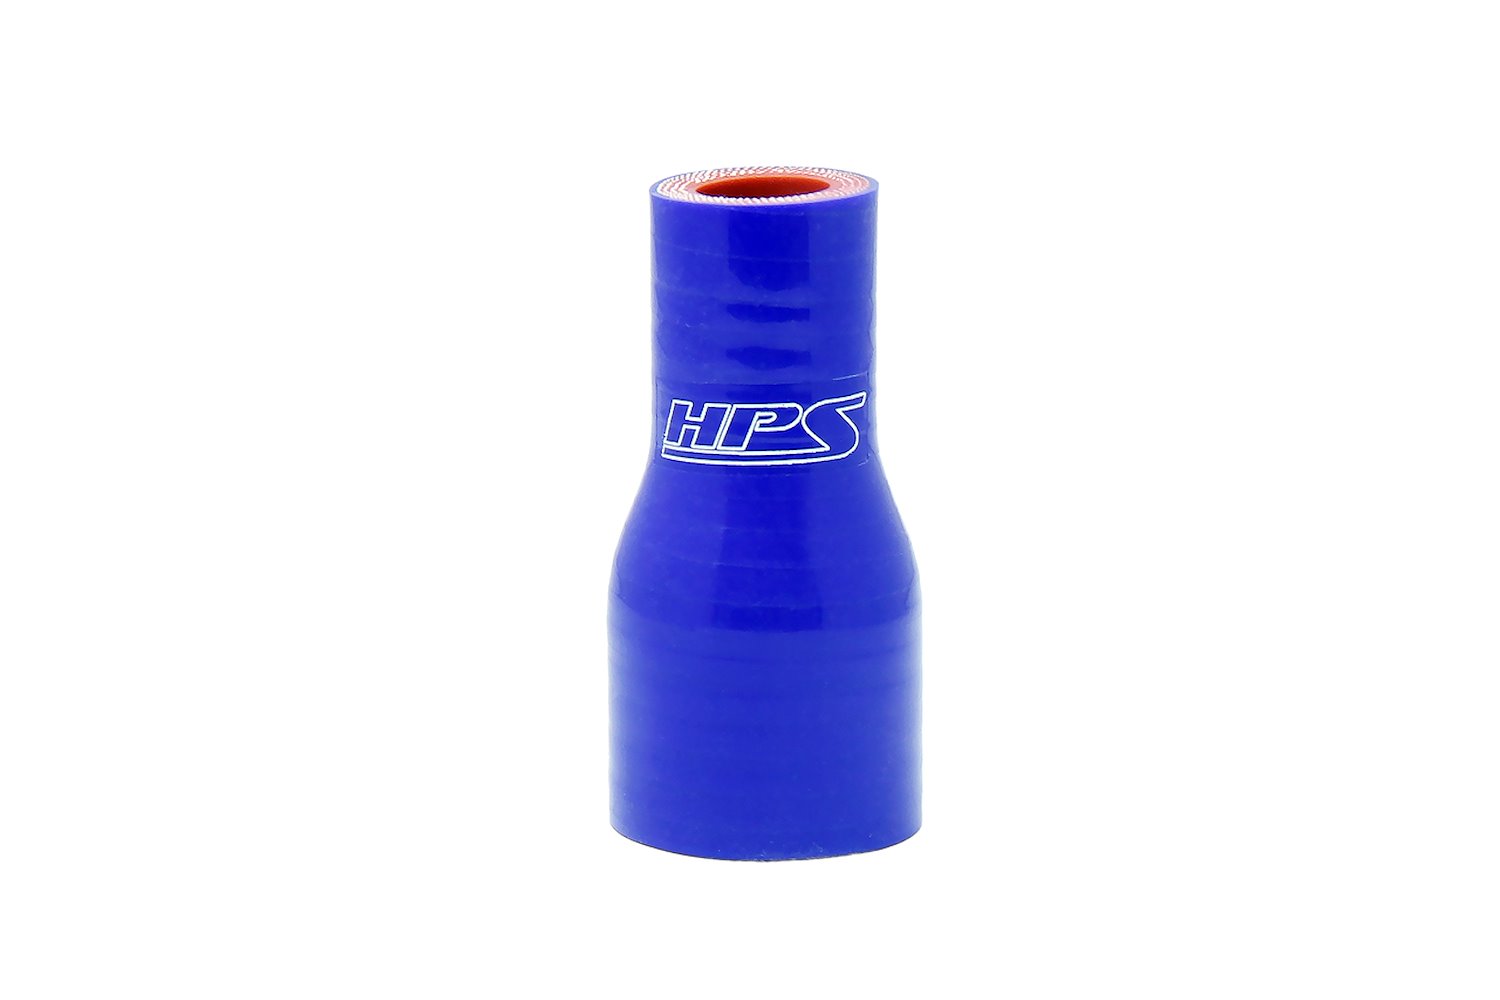 HTSR-100-138-BLUE Silicone Reducer Hose, High-Temp 4-Ply Reinforced, 1 in. - 1-3/8 in. ID, 3 in. Long, Blue